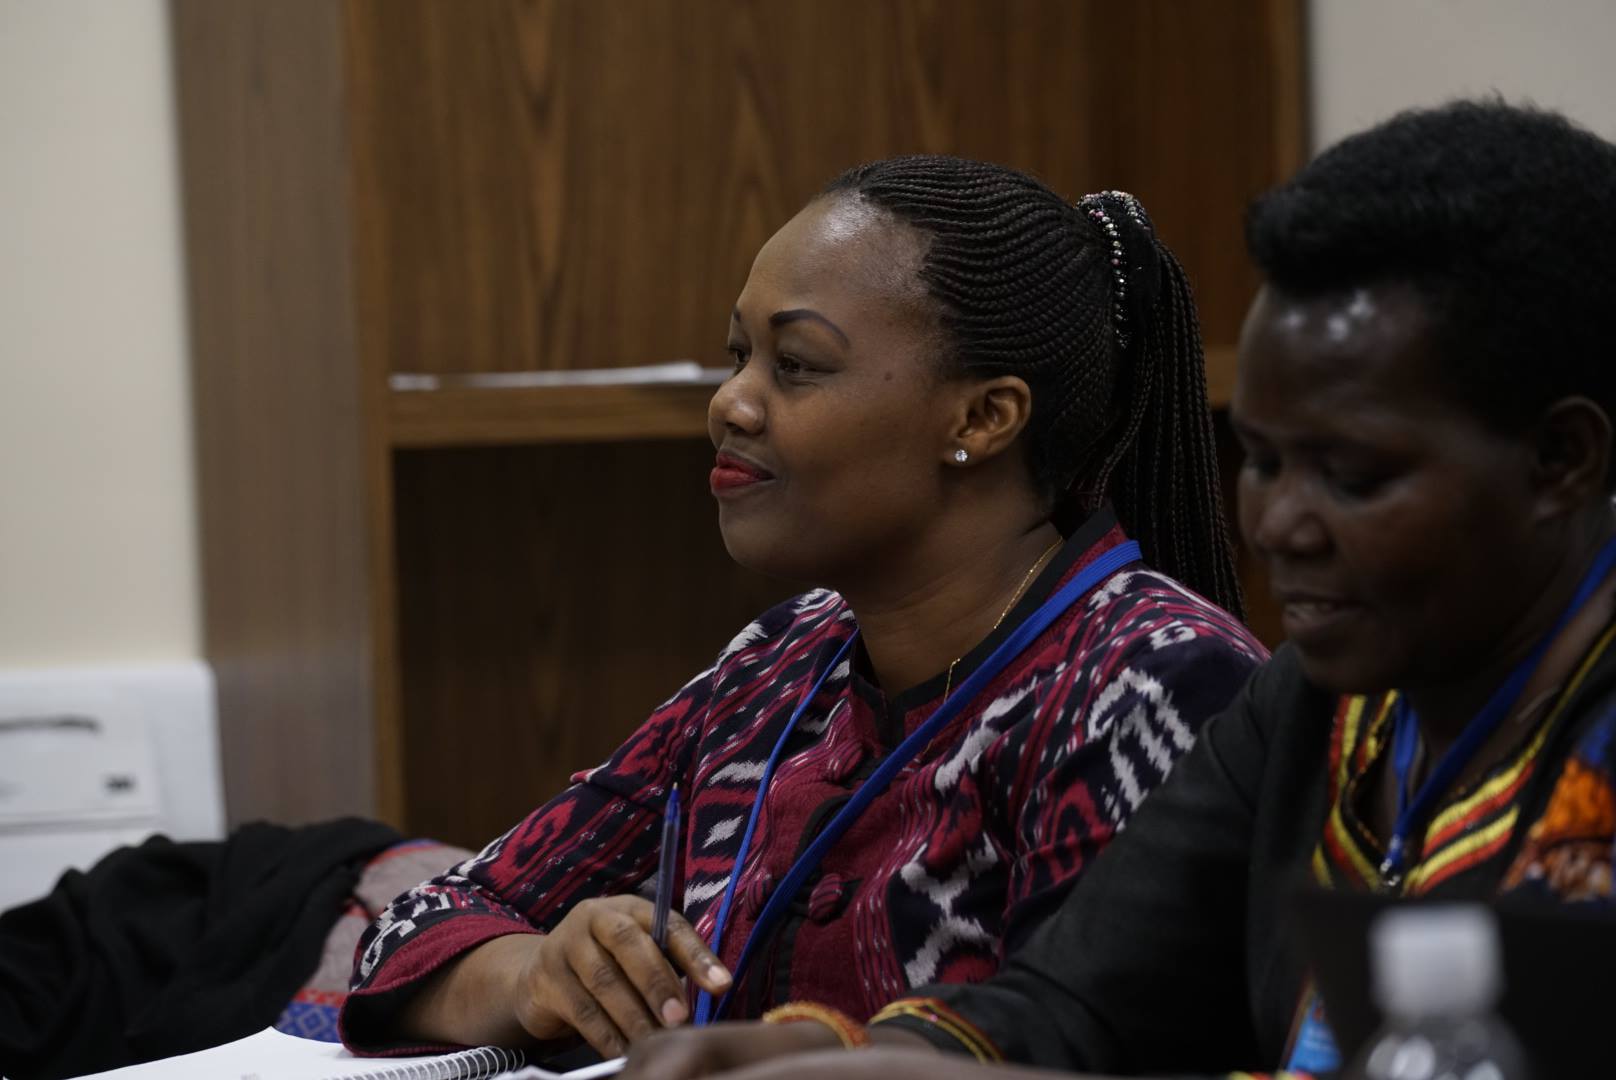 Mathilde, a Rwandan woman with long dreadlocks and wearing a patterned shirt, speaks at a panel table.